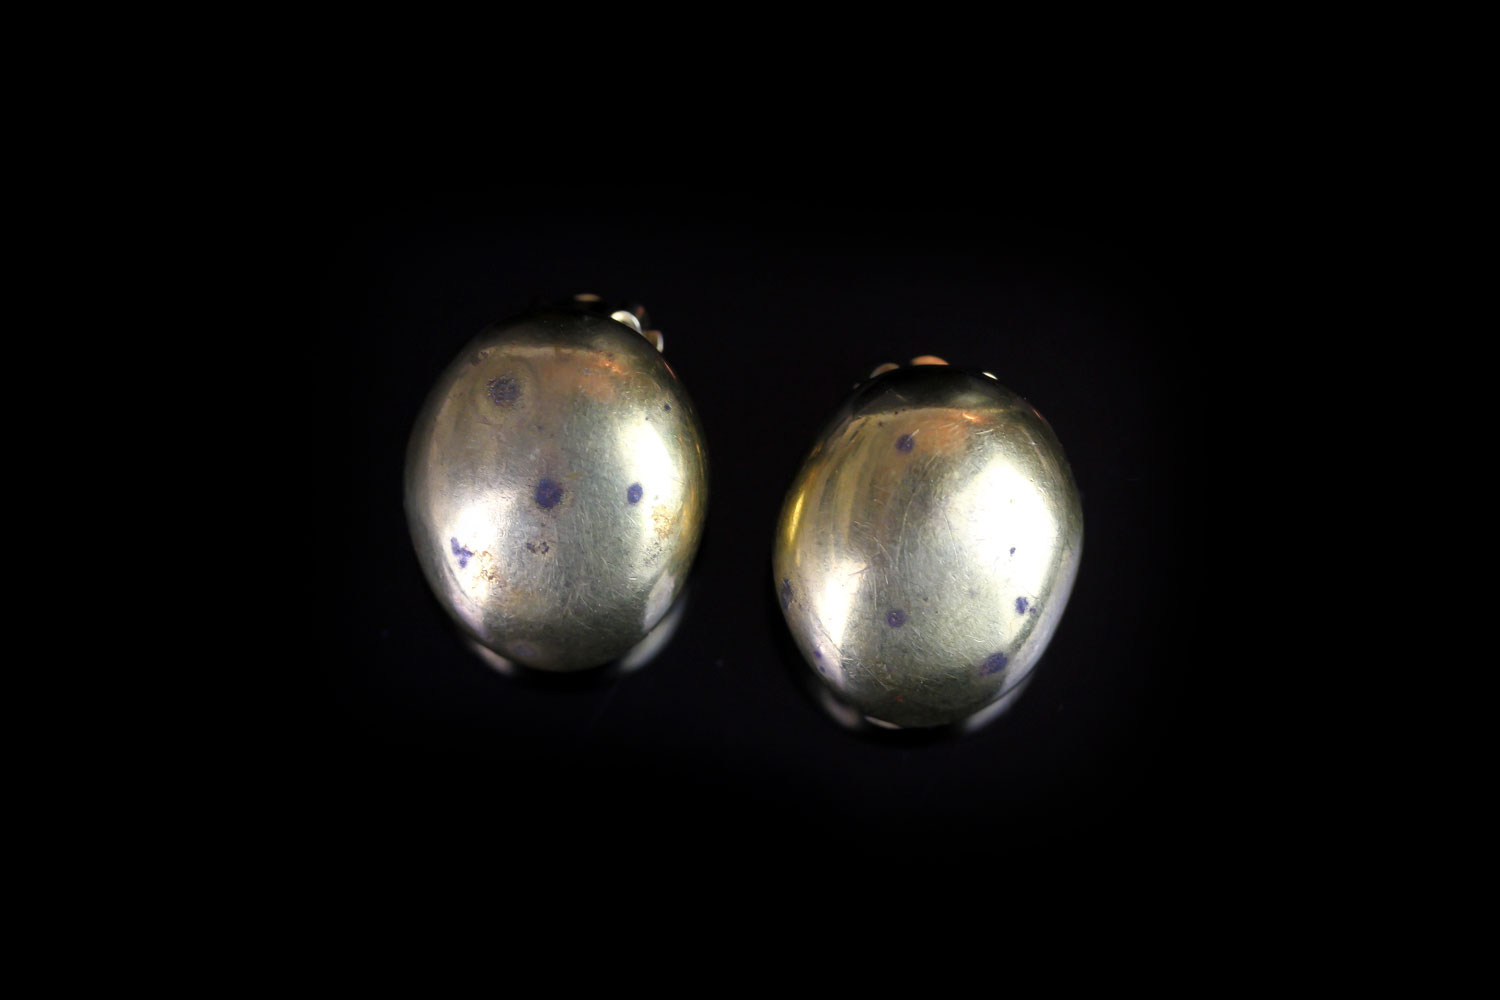 Vaubel, New York designer clip on earrings, 21x17.5mm domes, patinated finish, 18ct gold plated